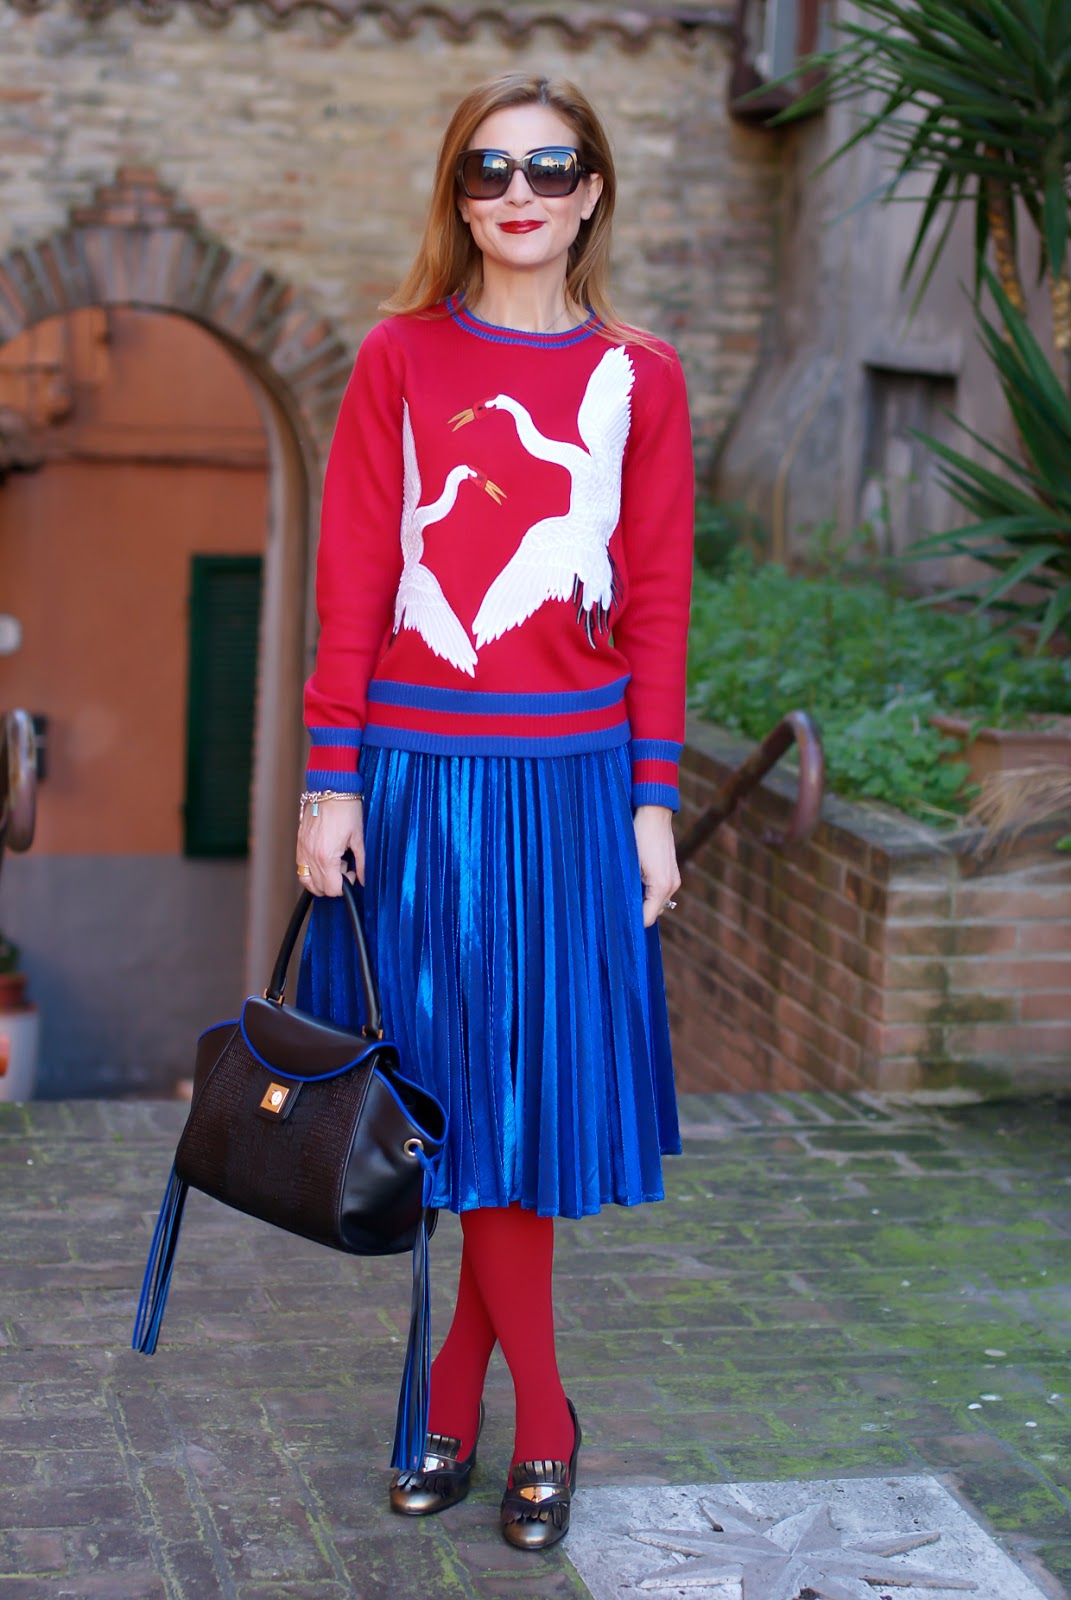 Dezzal bird embroidered sweater, metallic pleated skirt and Iaya Asciani Paris bag on Fashion and Cookies fashion blog, fashion blogger style